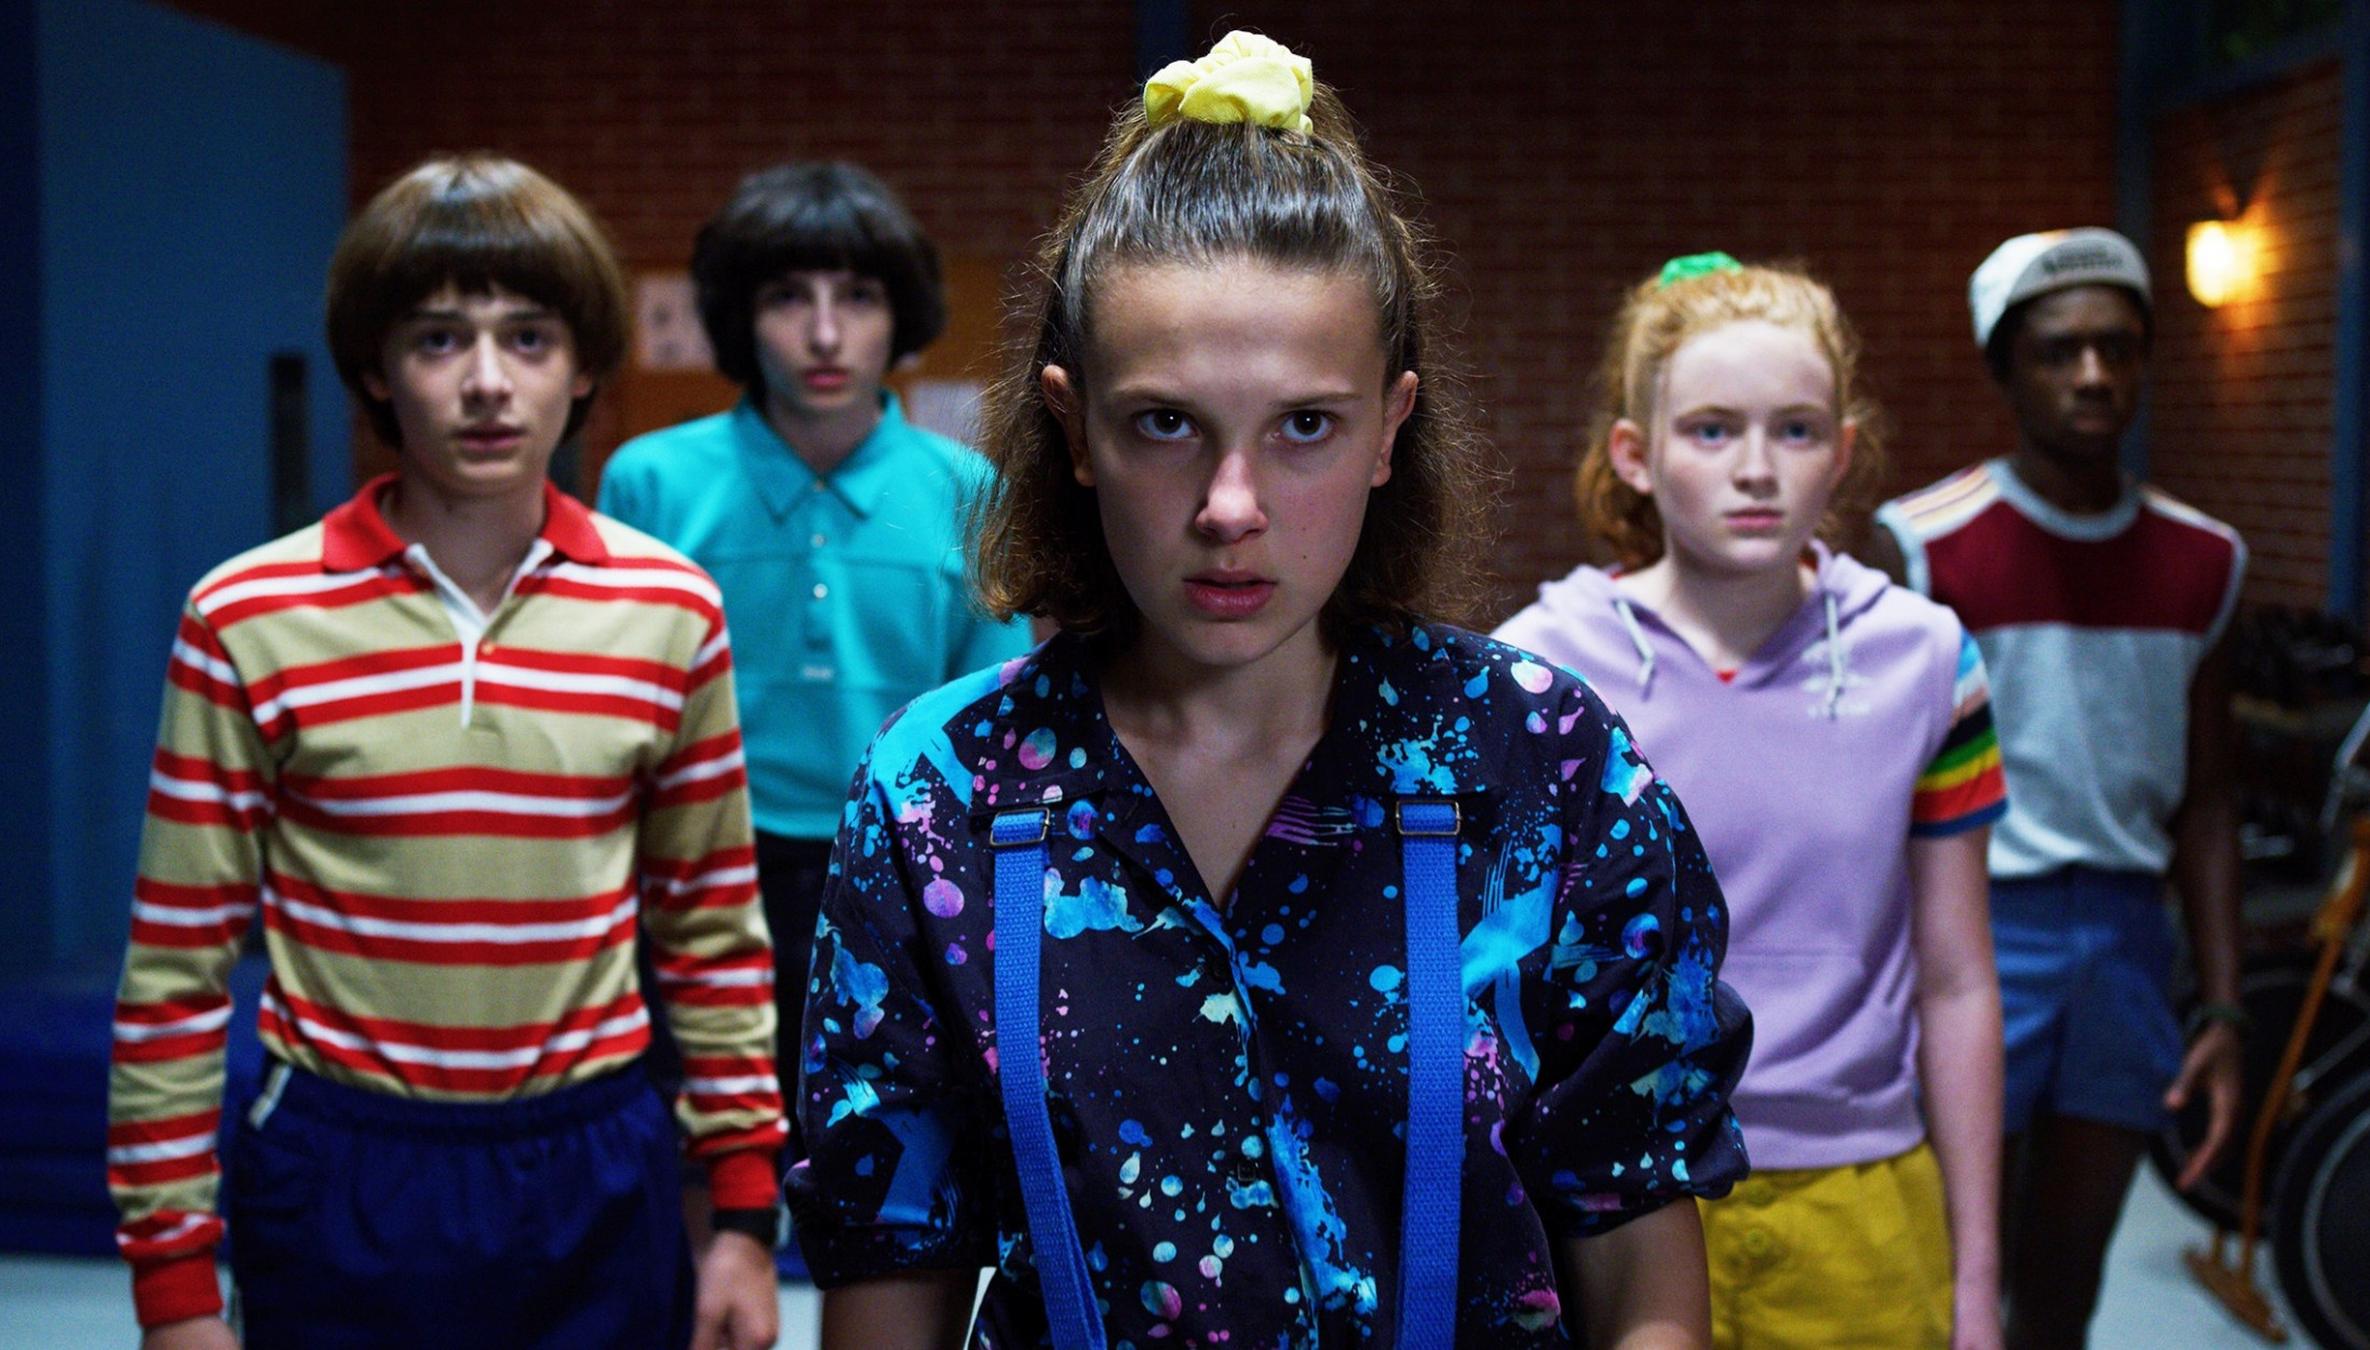 Stranger Things season 4: Episode name, possible new characters revealed -  CNET